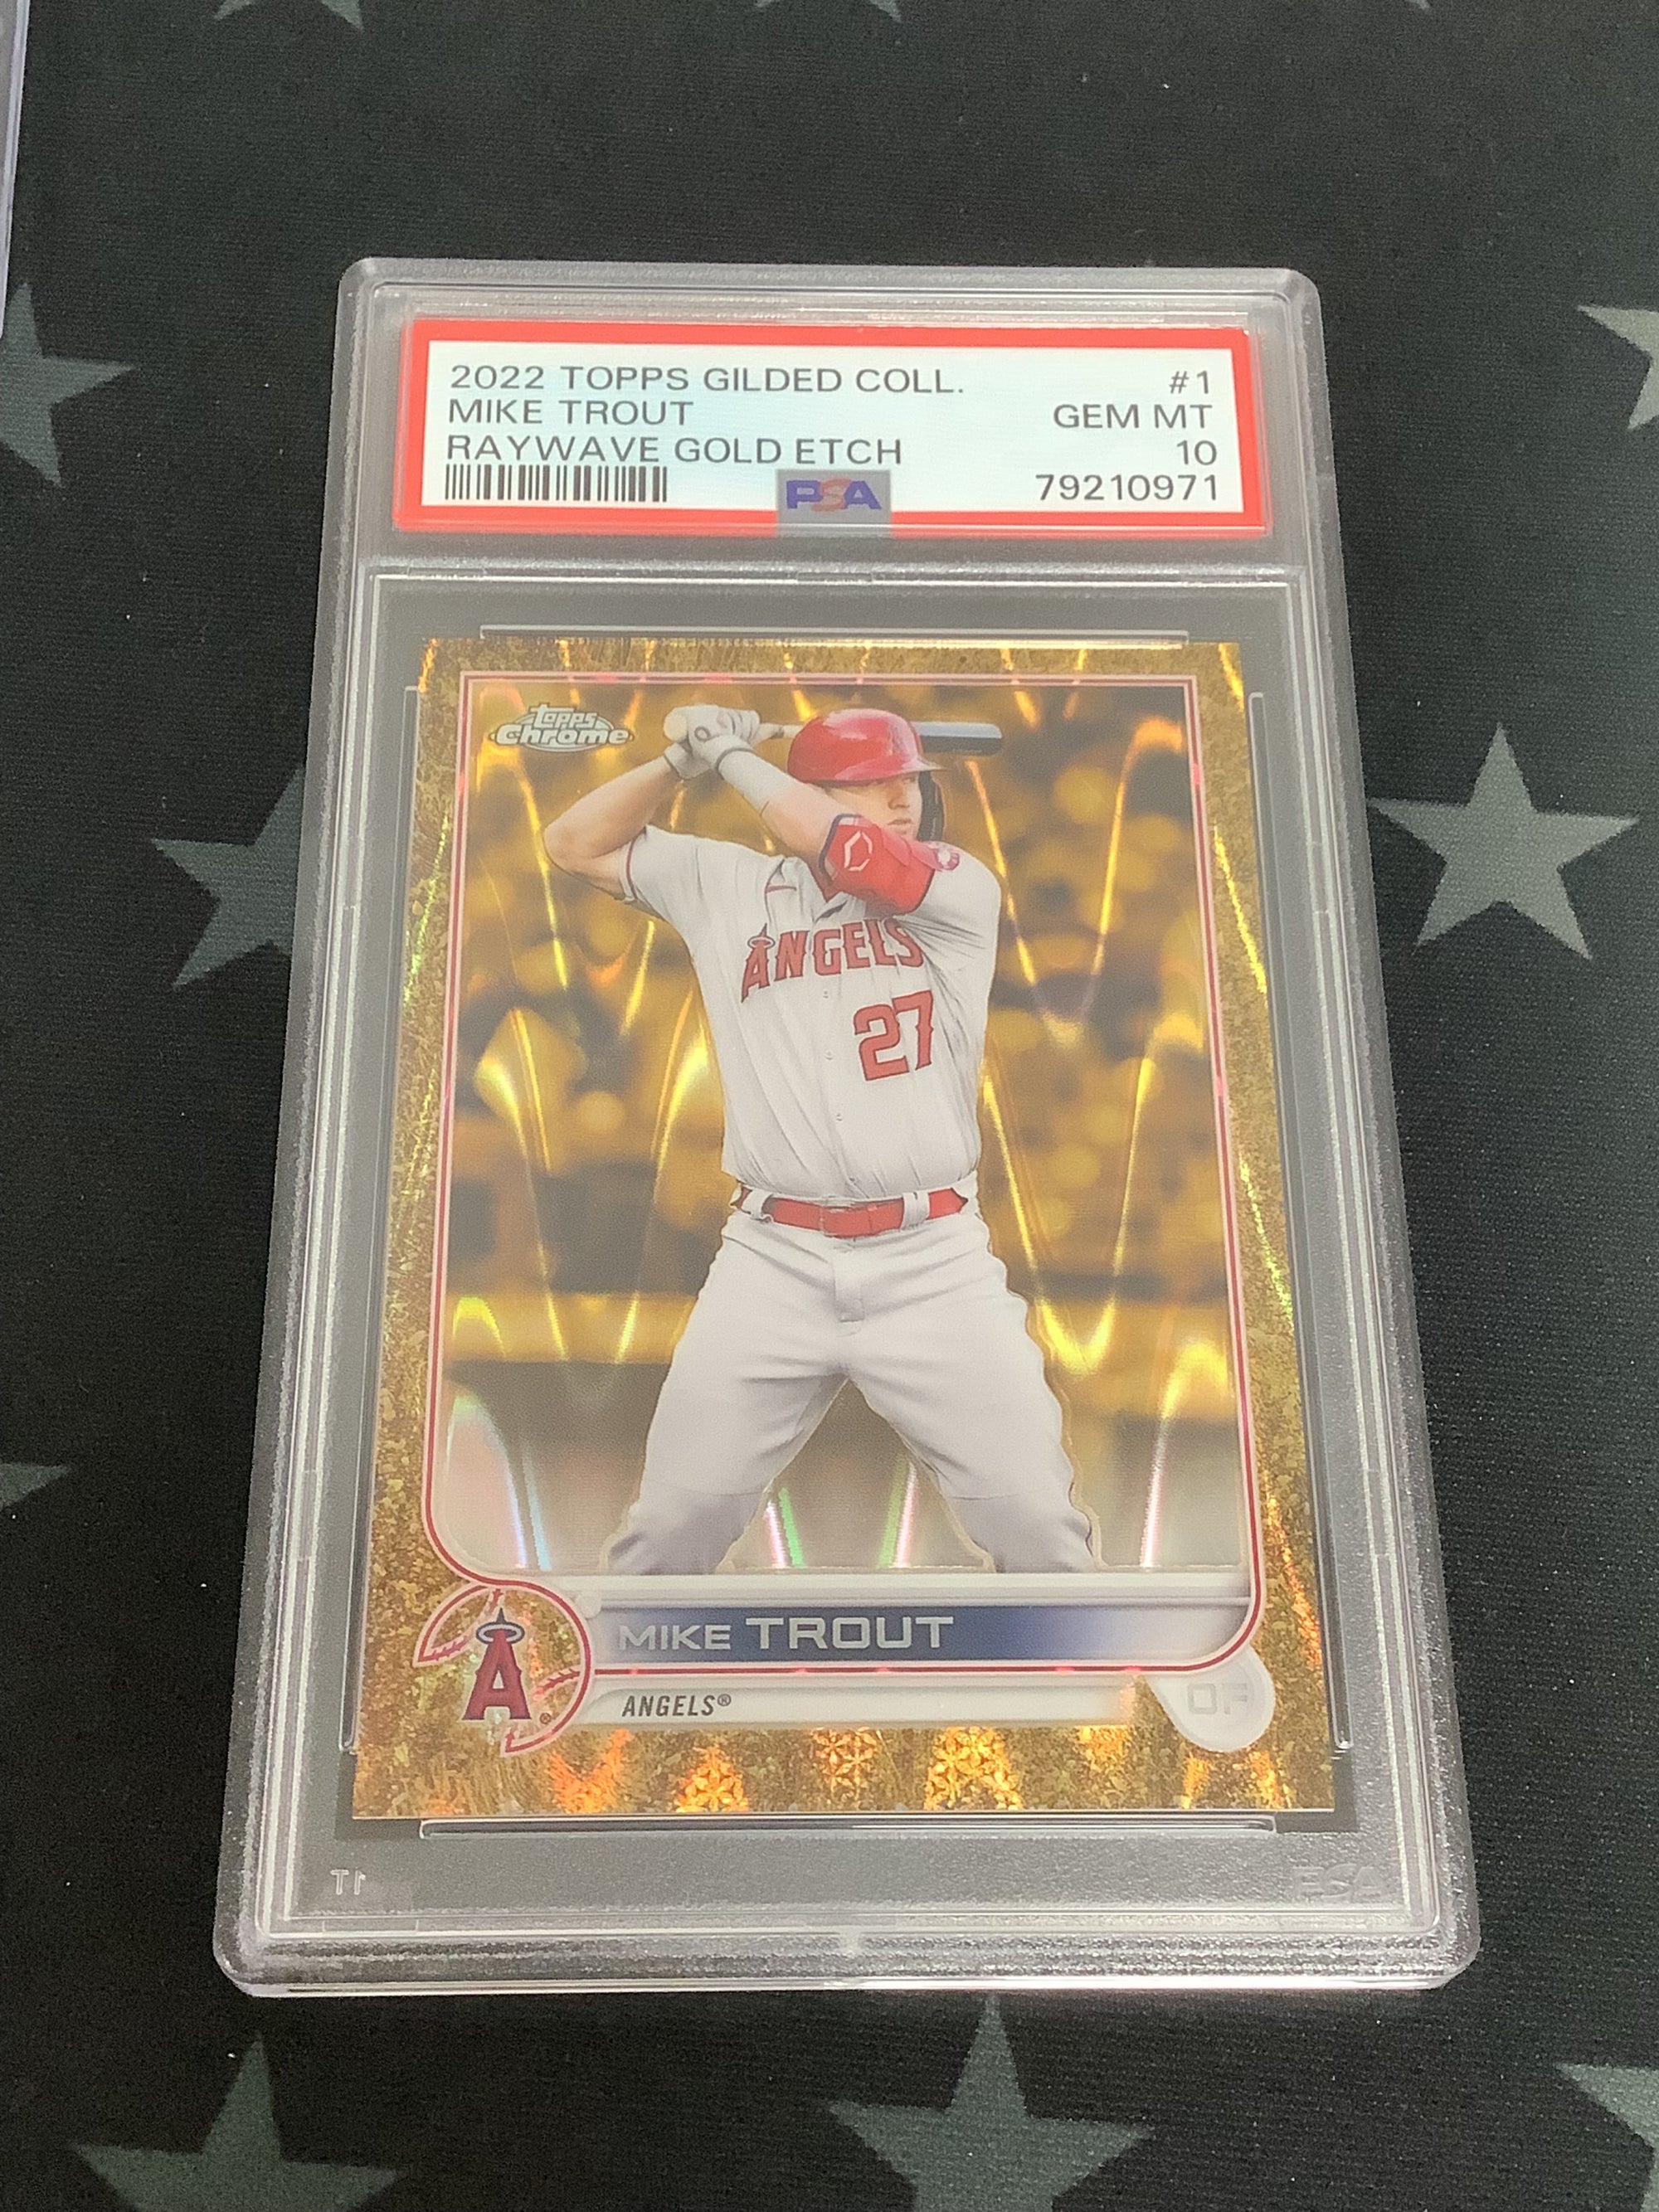 2023 TOPPS GILDED MIKE TROUT RAYWAVE GOLD ETCH /25 PSA 10